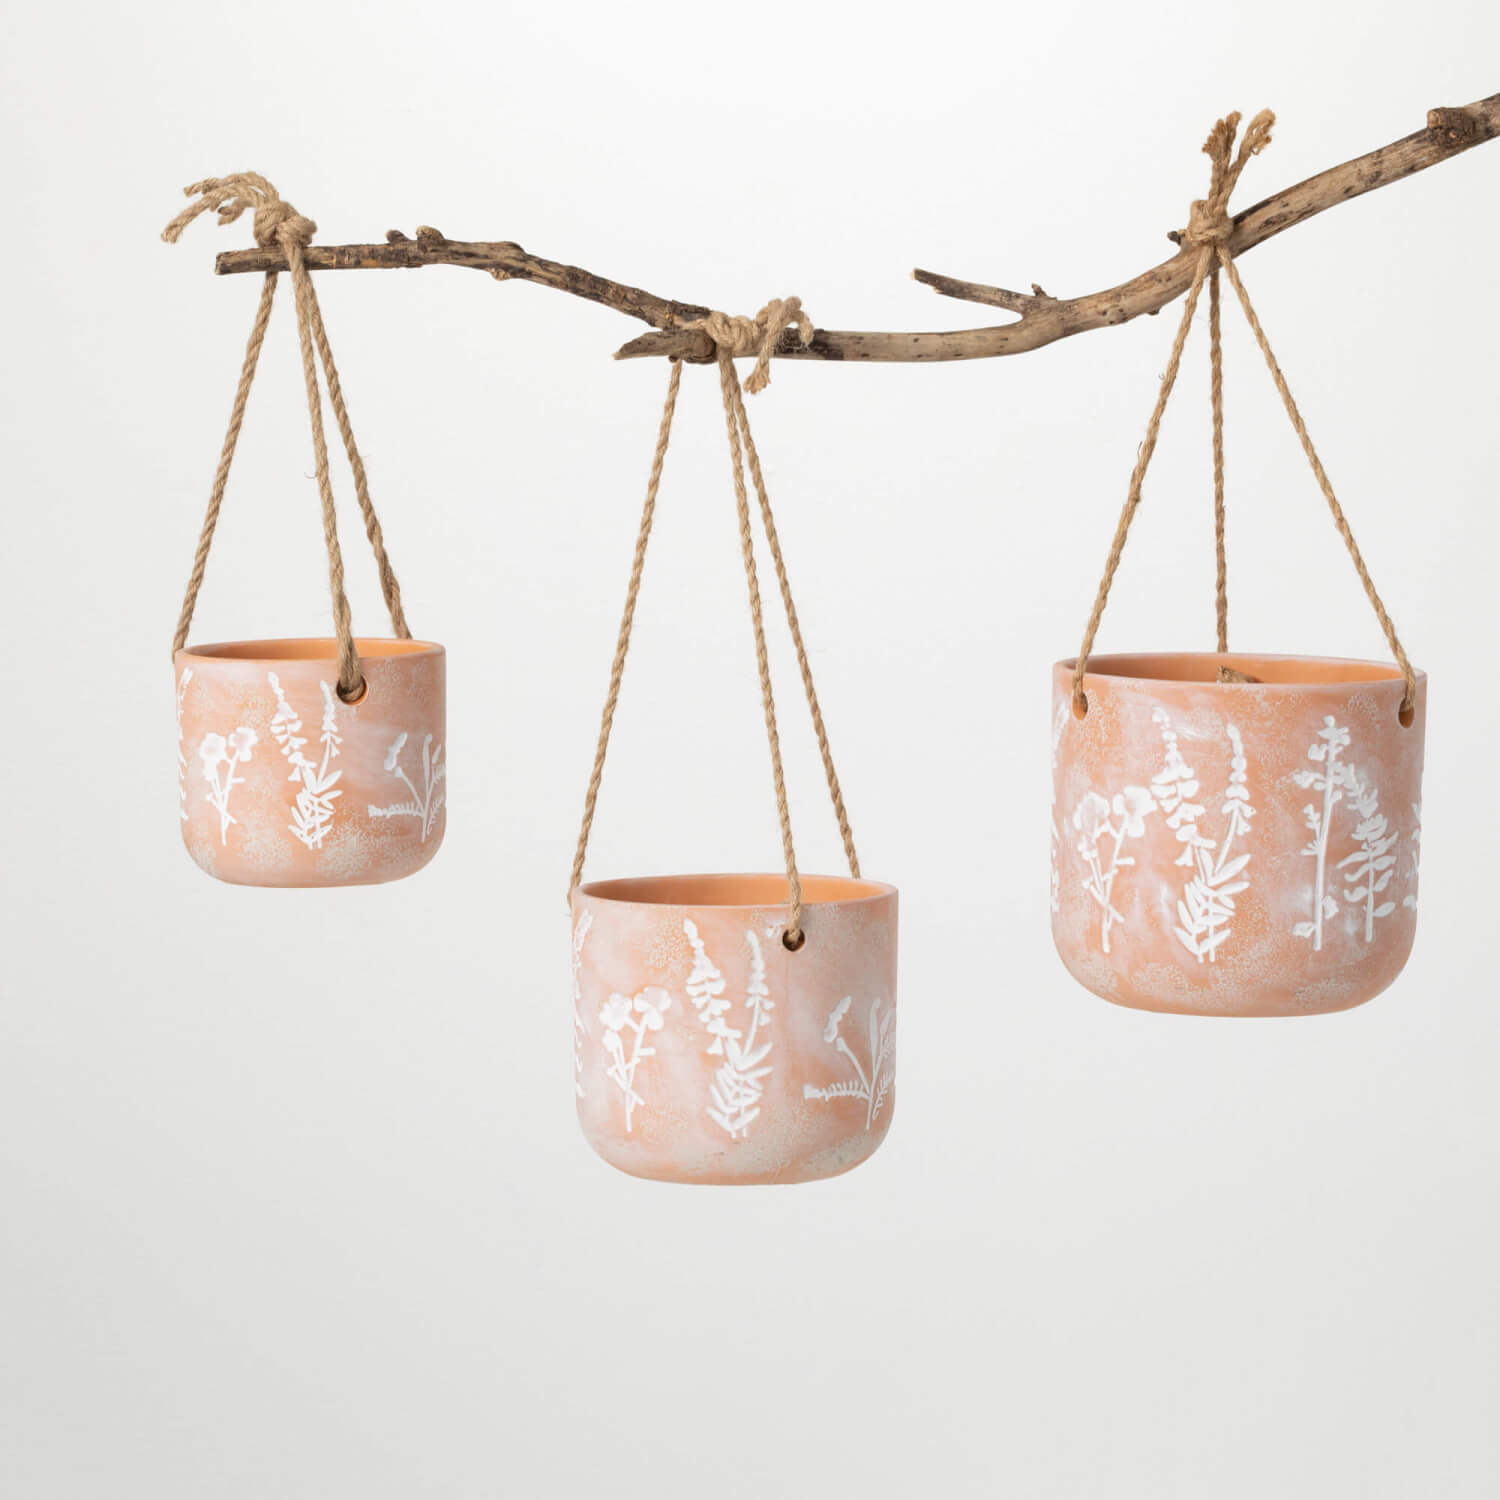 3 sizes of terracotta pots with white herb graphics on them hanging from a  branch on a white background.